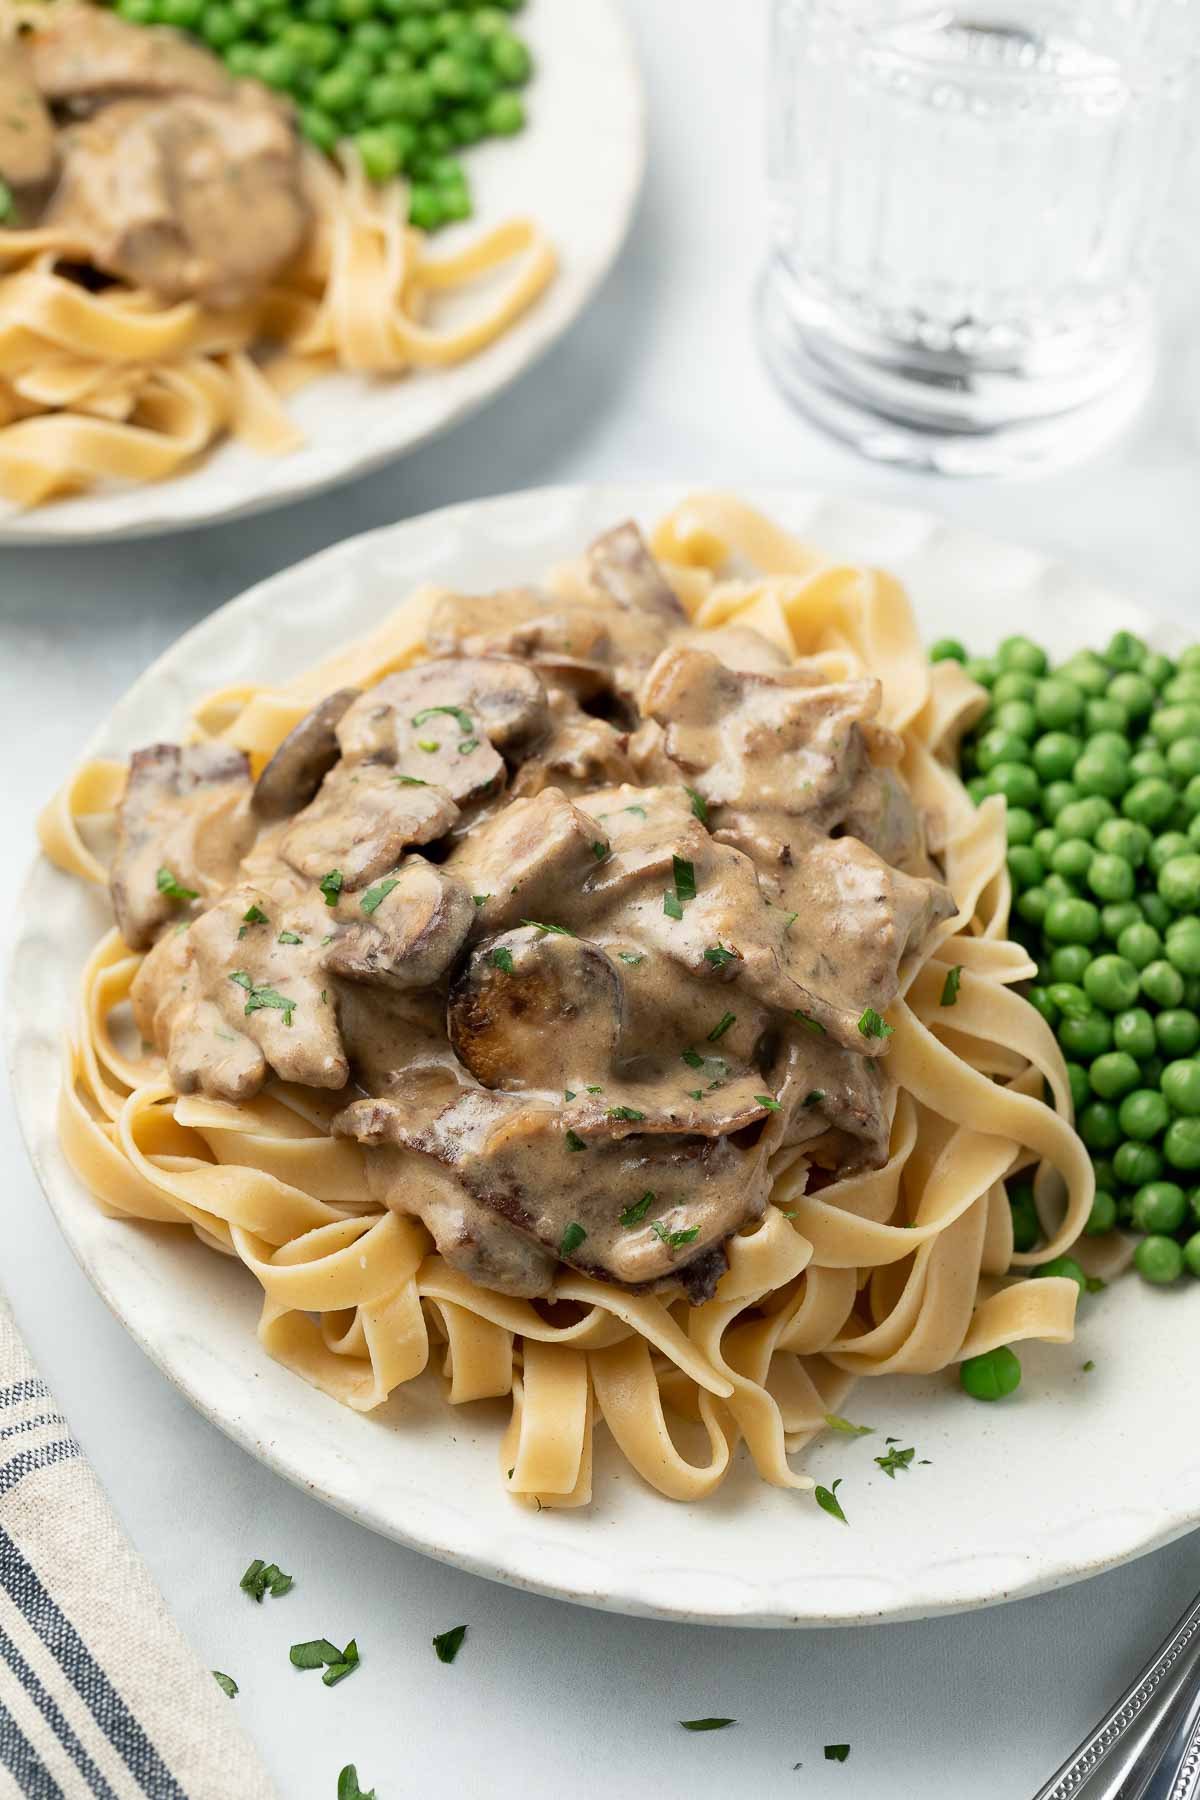 Gluten-free beef stroganoff plated with steamed peas.